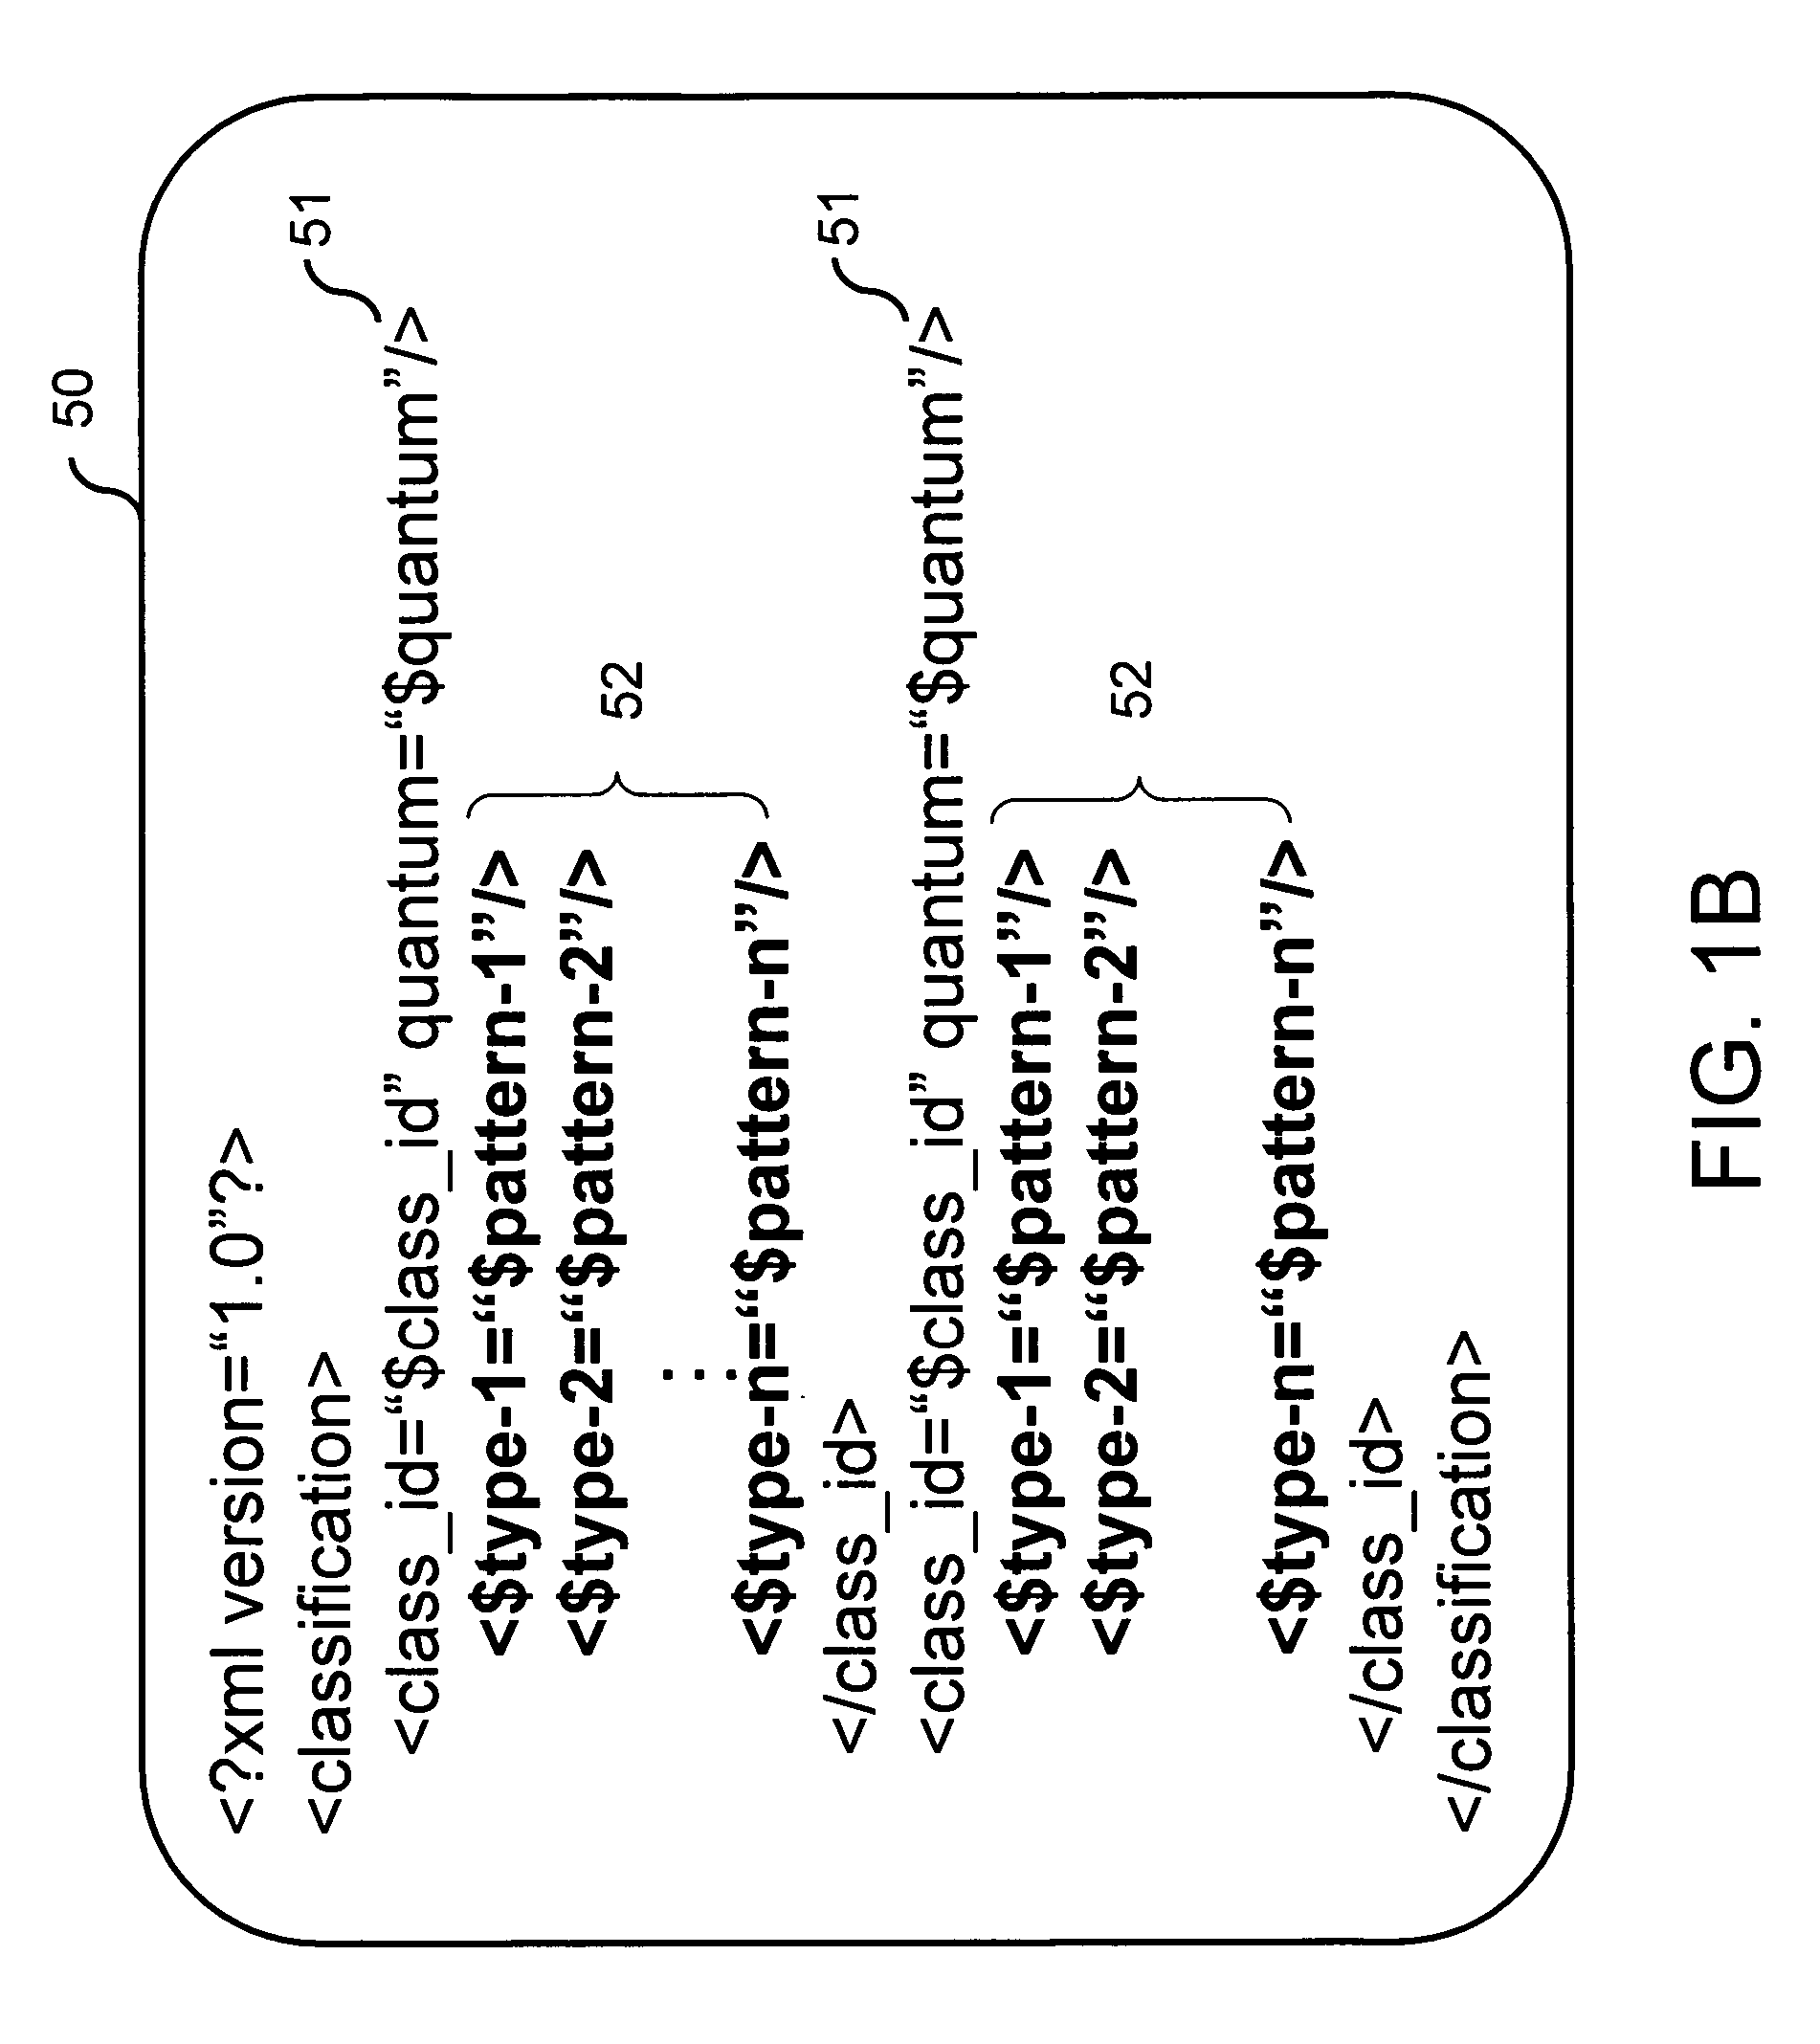 System and method of request scheduling for differentiated quality of service at an intermediary